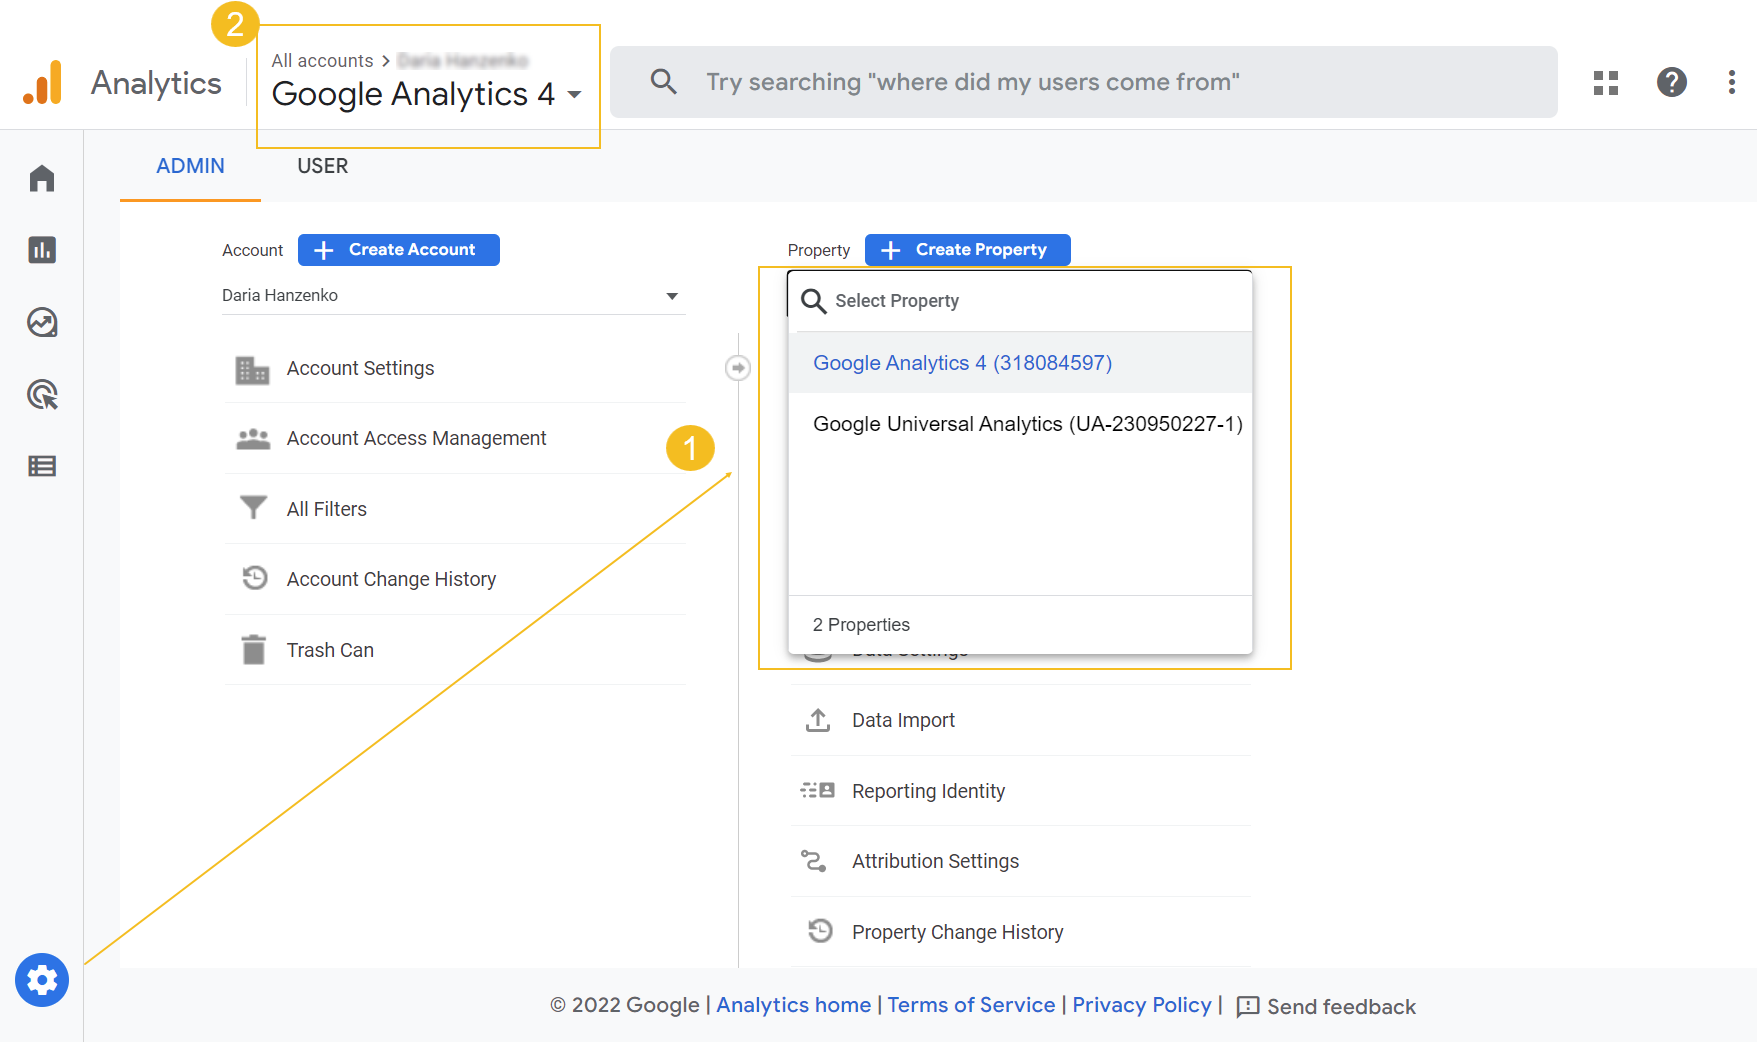 Accessing both Google Universal and Google Analytics 4 properties from the Admin panel and from the property switcher